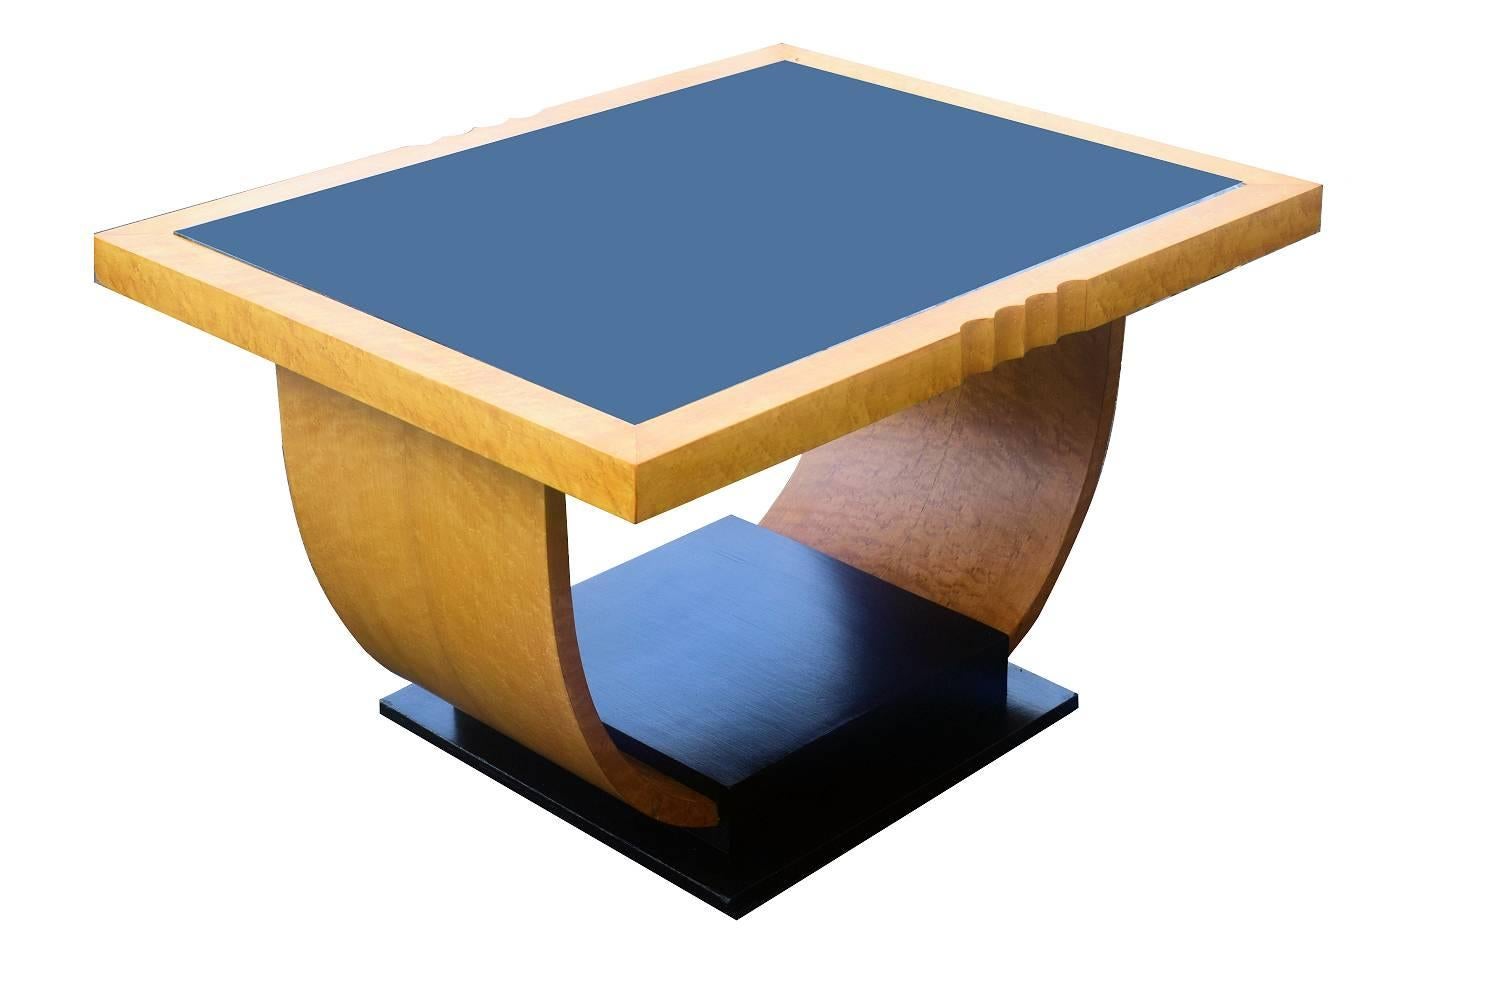 For your consideration is this fabulously stylish Art Deco English occasional table. Light blonde maple veneer is accentuated beautifully with the ebonised woods. Black glass top, so easily maintained and cleaned. Generously proportioned so could